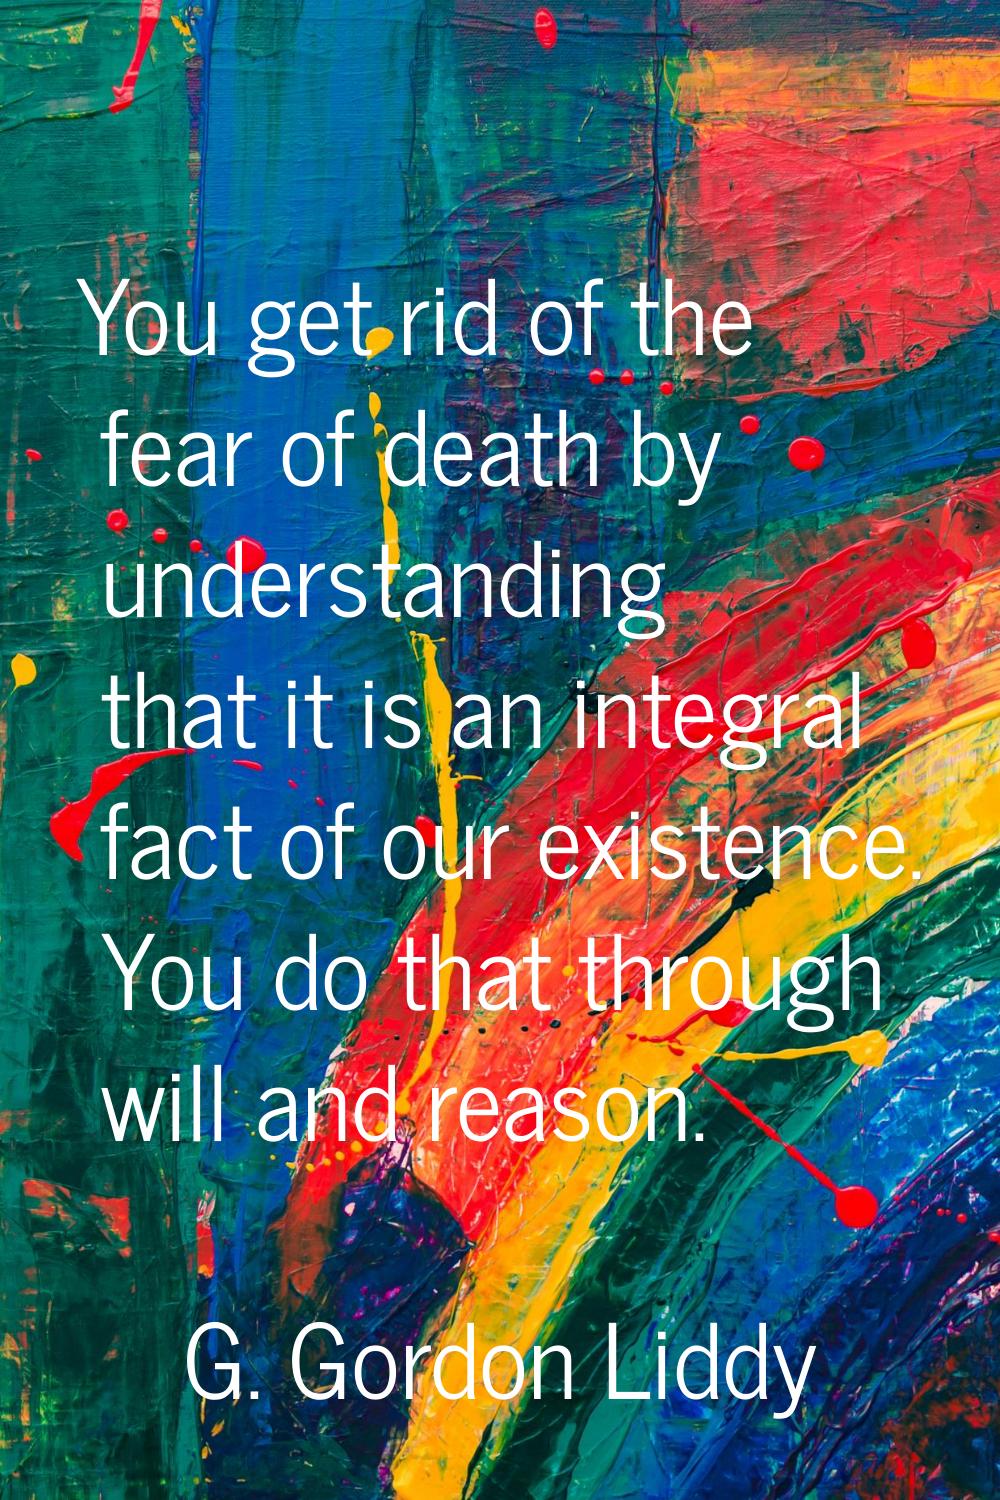 You get rid of the fear of death by understanding that it is an integral fact of our existence. You